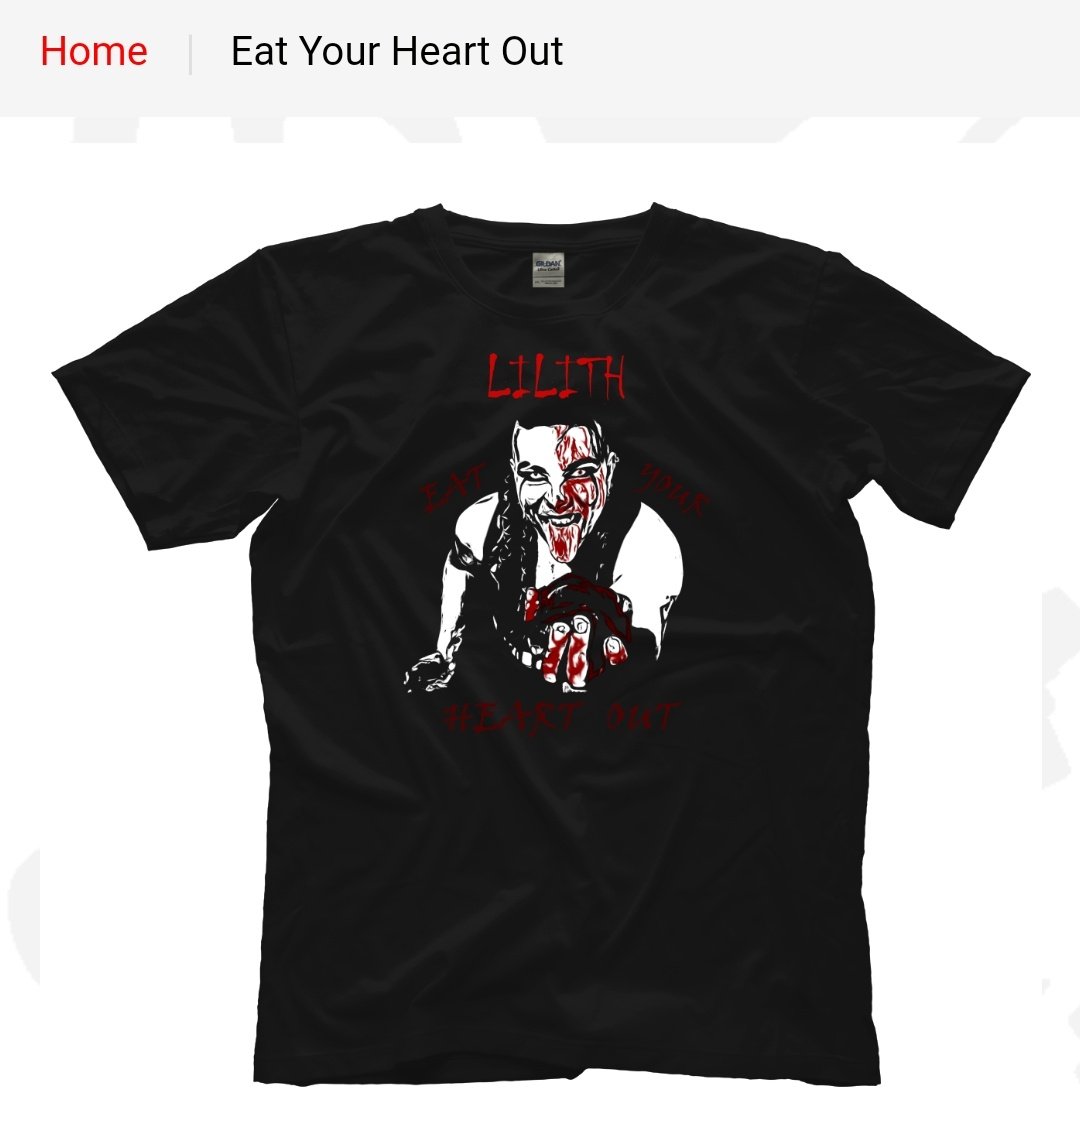 Not only is there a customer appreciation sale going on right now for 20% off!!
BUT!! My newest design just went live! 😏😈🖤
Get yours today!
prowrestlingtees.com/lilithgrimm